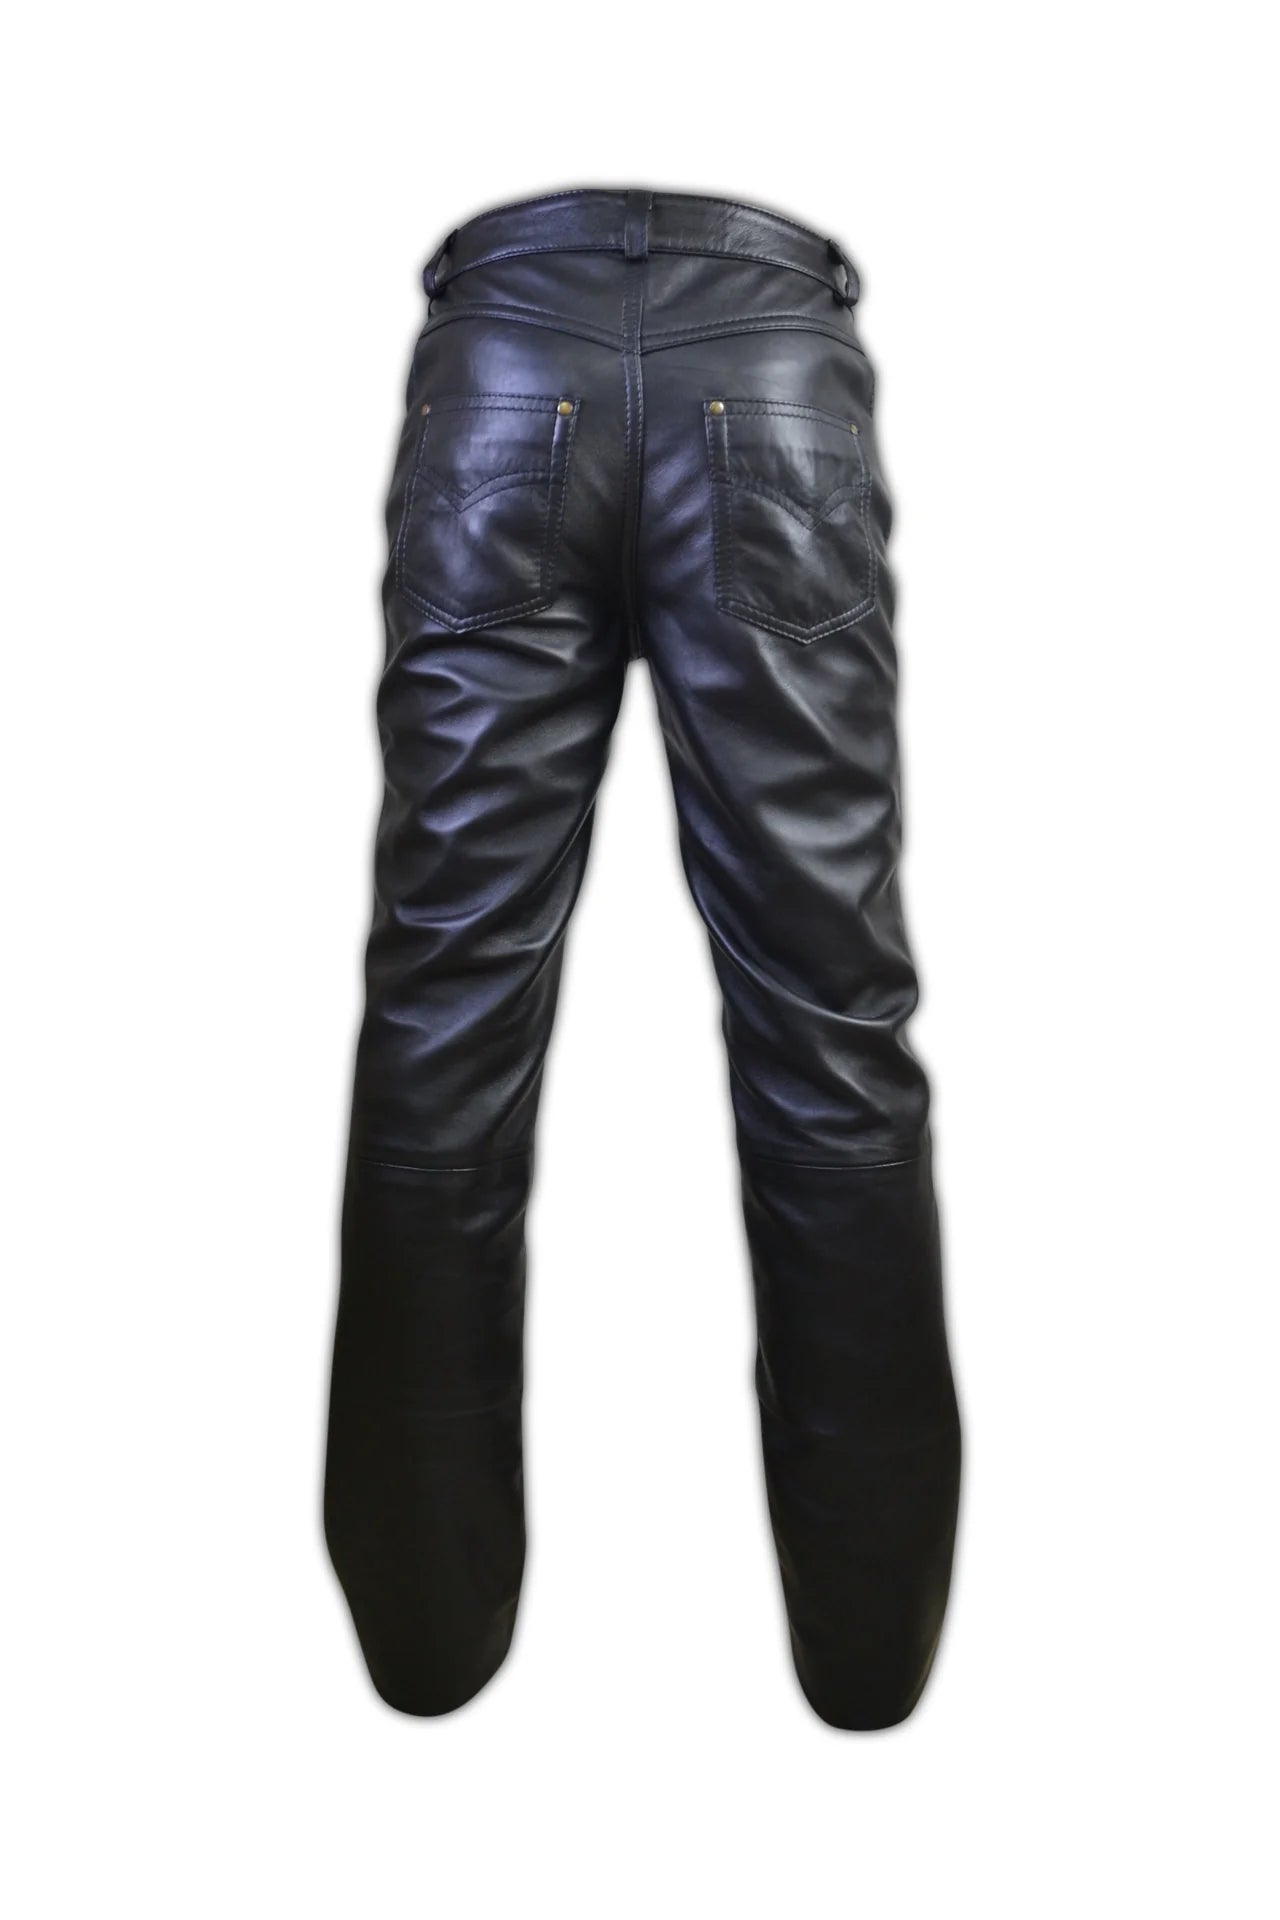 Jeans Style Leather Pant With 5 Pockets - PINESMAX